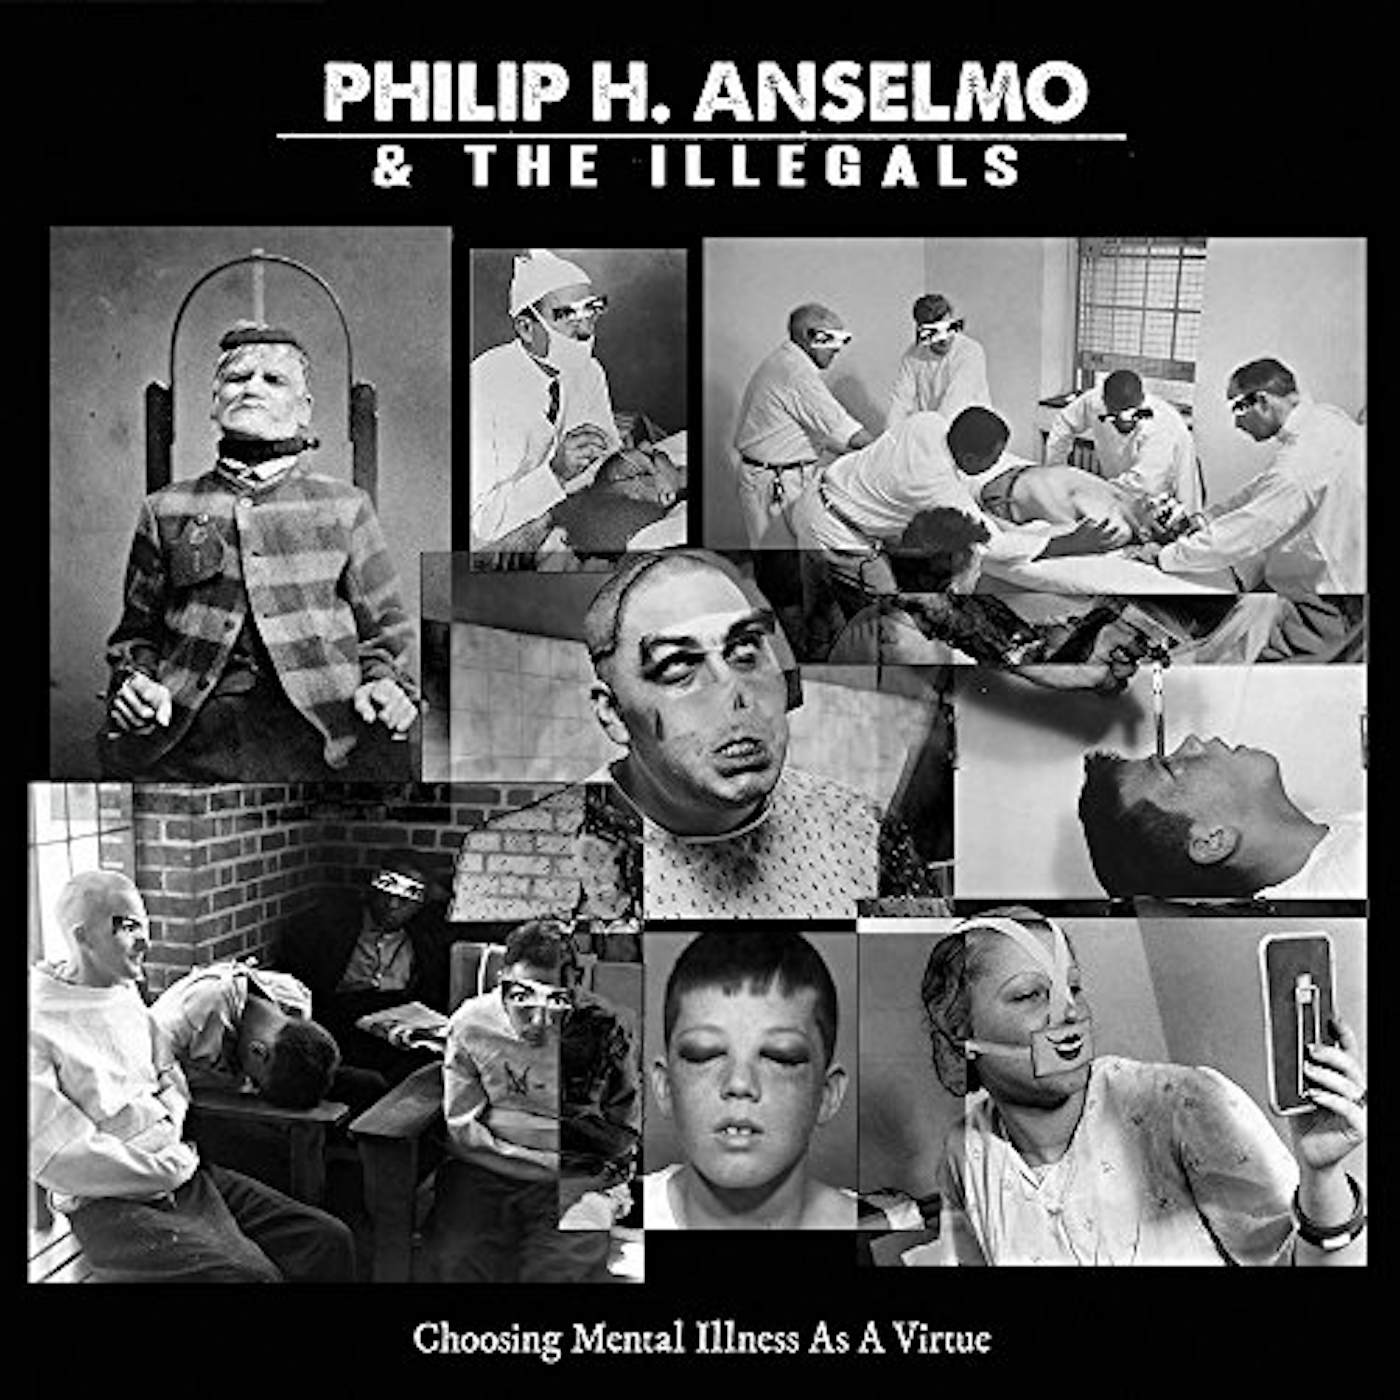 Philip H. Anselmo and The Illegals CHOOSING MENTAL ILLNESS AS A VIRTUE CD